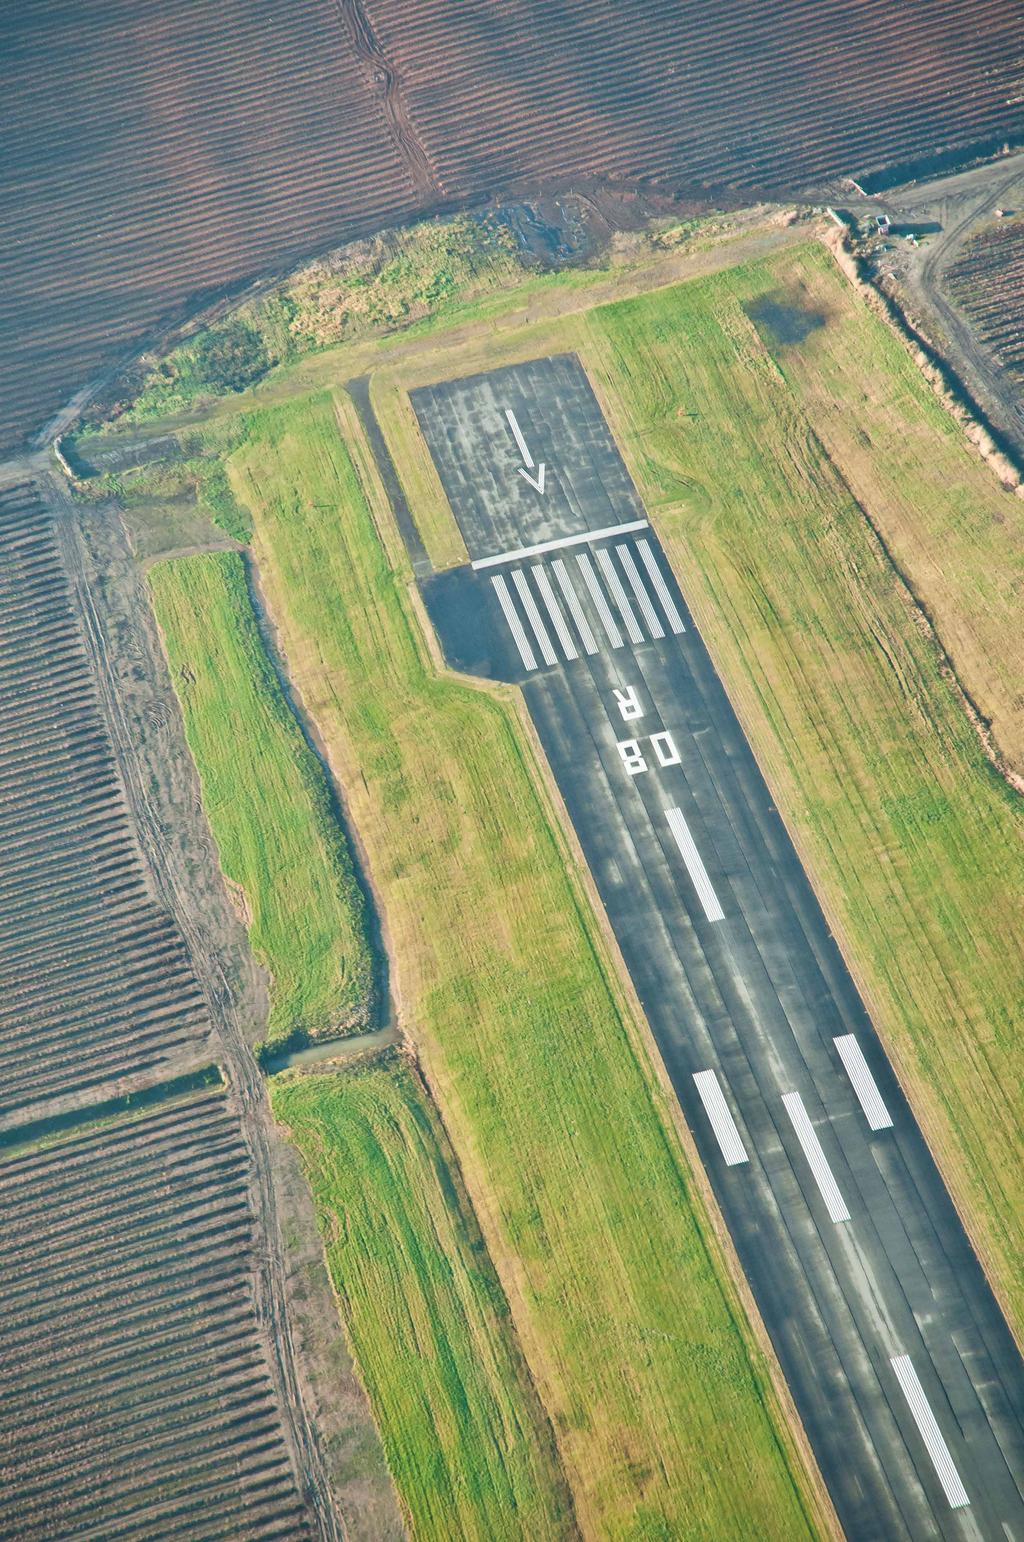 RUNWAY END SAFETY AREAS (RESAs) What s a RESAs? A RESA is a cleared area at the end of a runway.